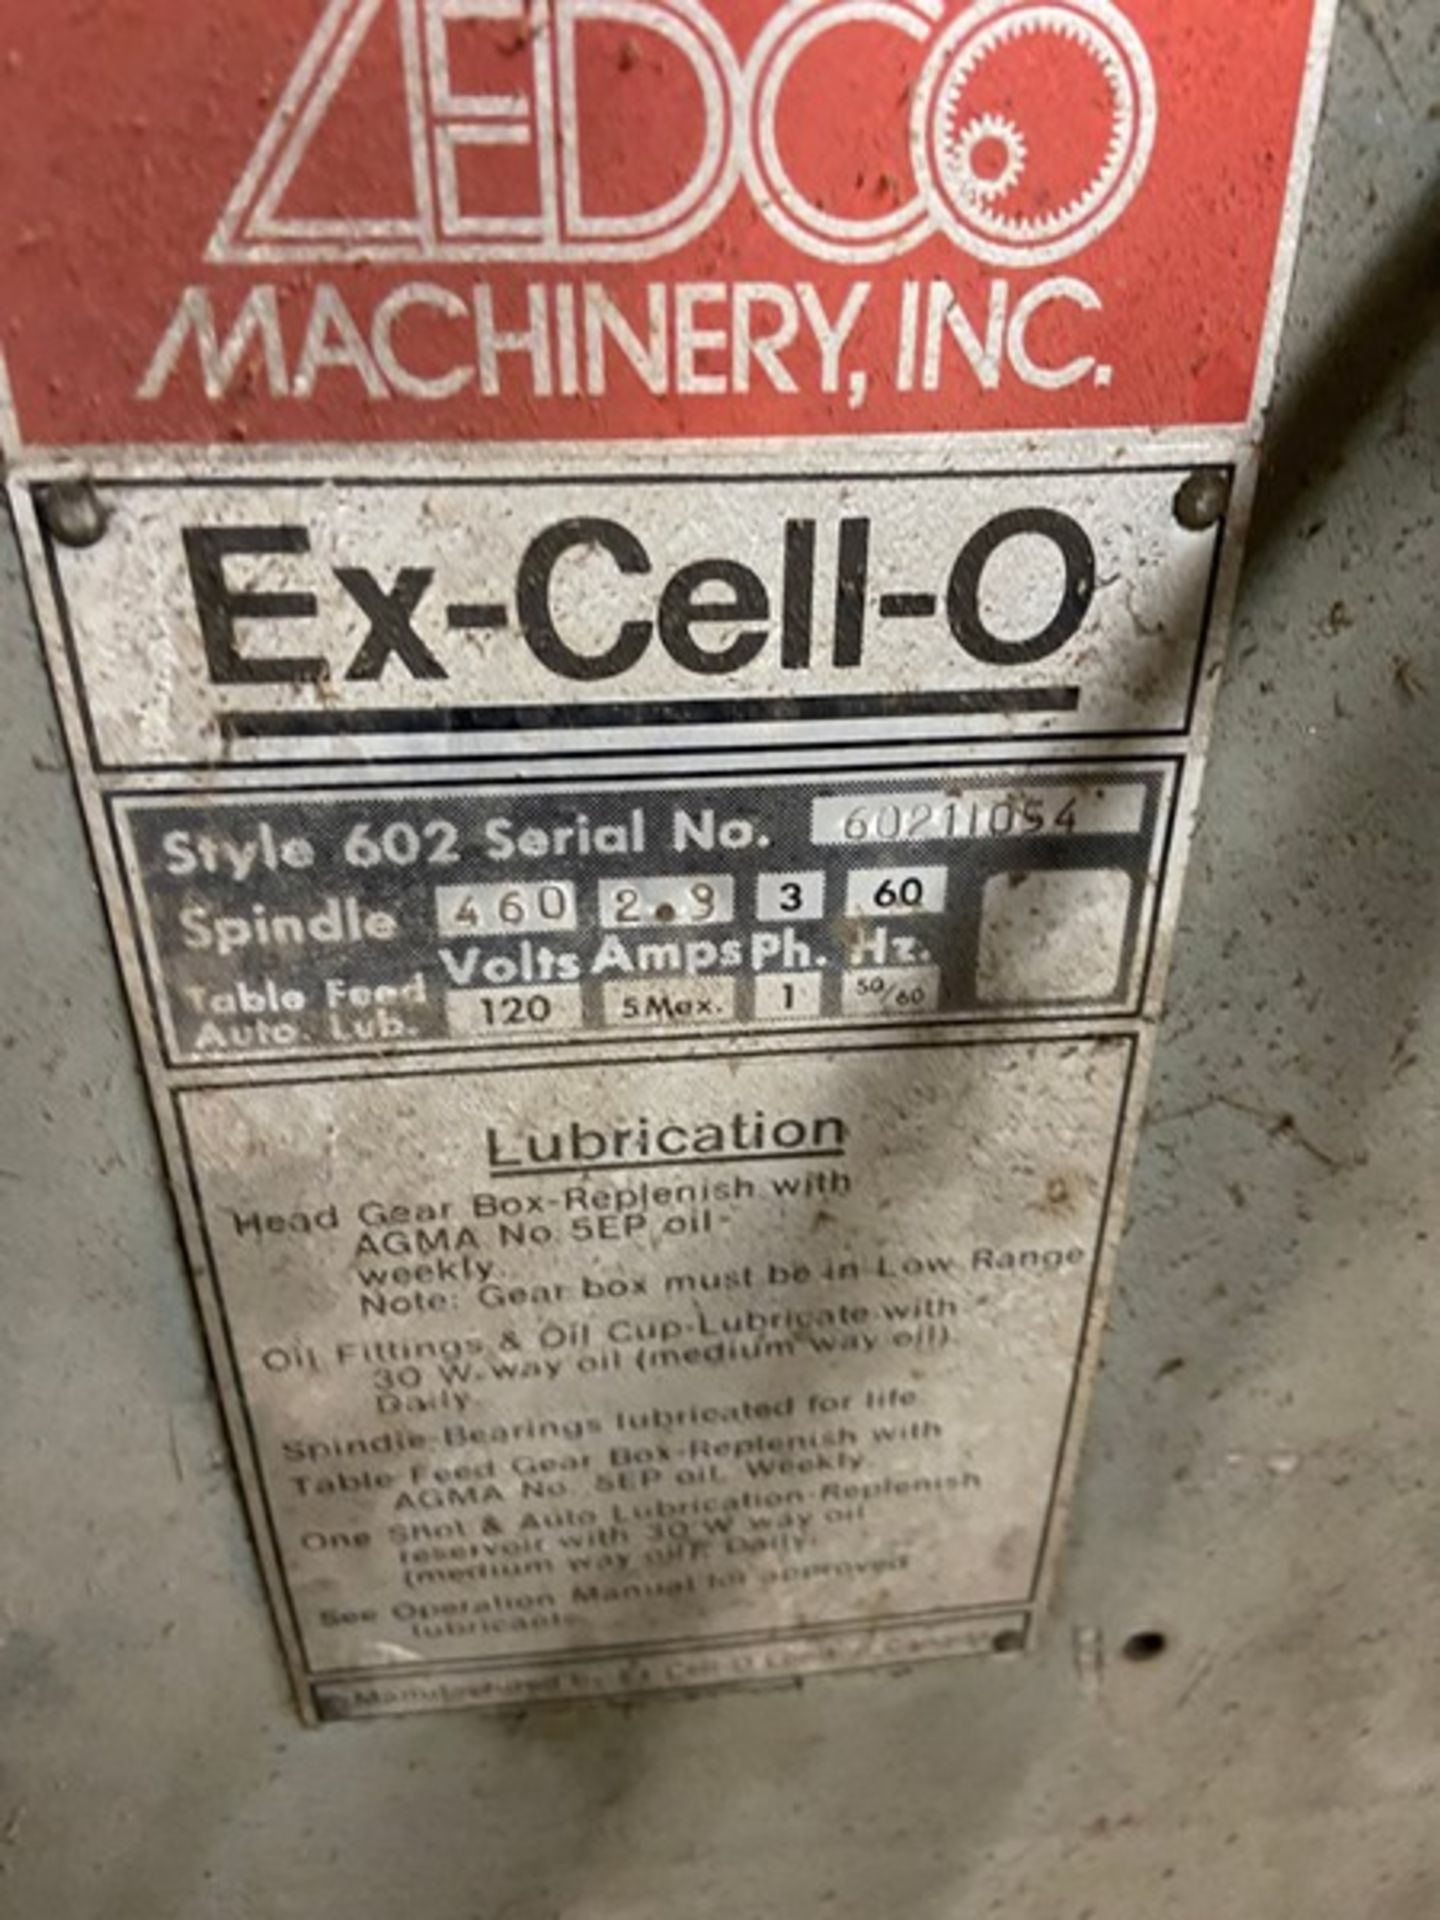 Ex-Cell-O Vertical Mill, Style 602, S/N 60211054, 460 Volts, 3 Phase (LOCATED IN CORRY, PA) - Image 5 of 7